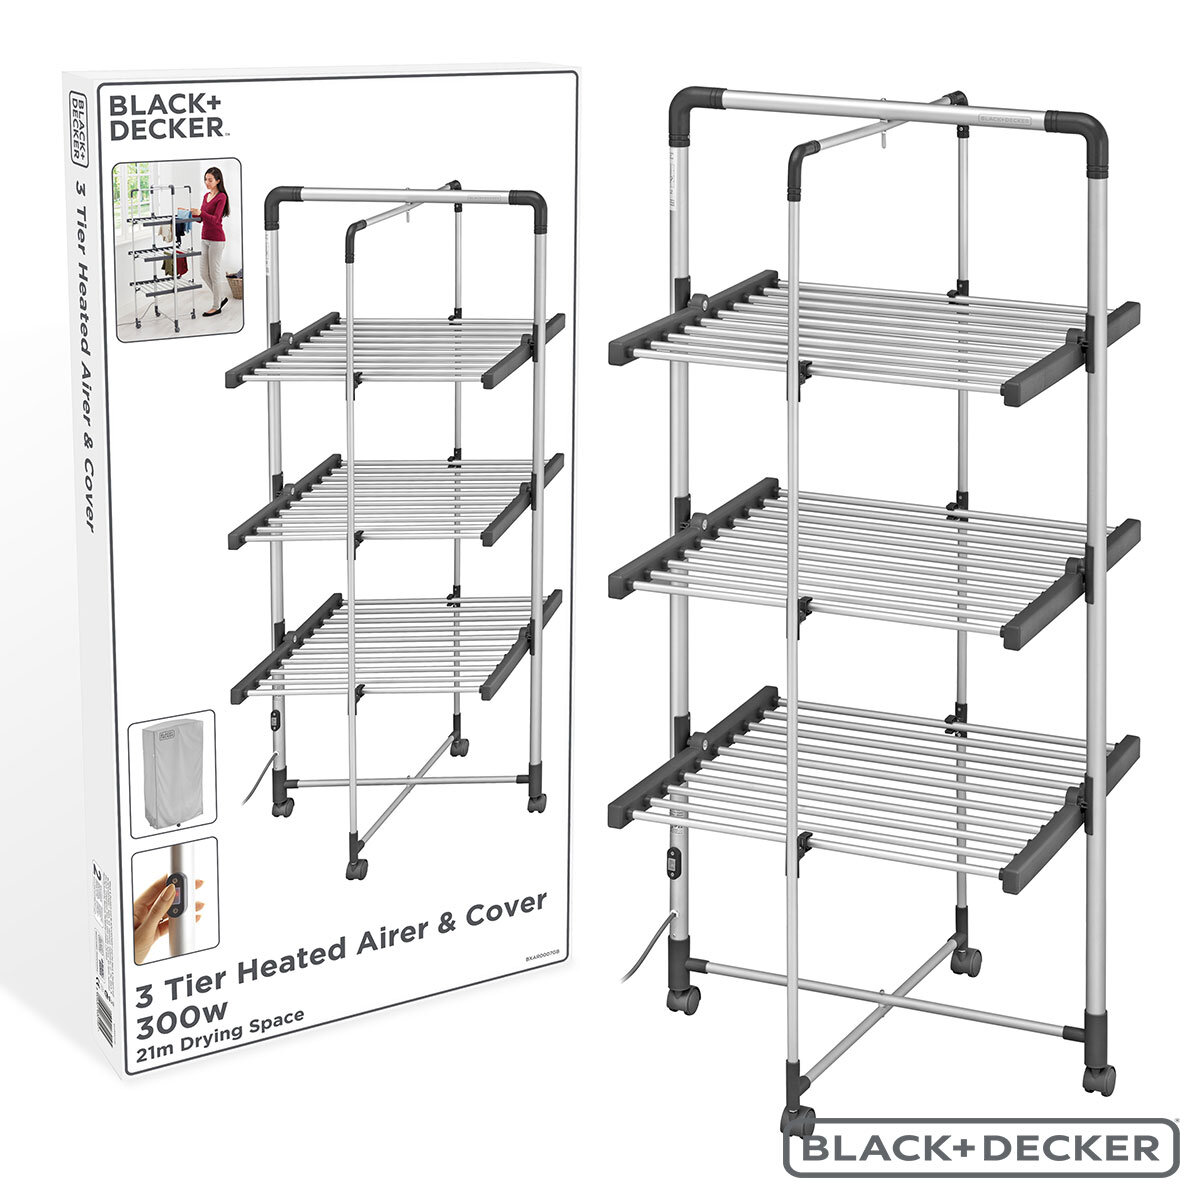 Vybra 3 Tier Heated Airer With Cover, VS001-36R